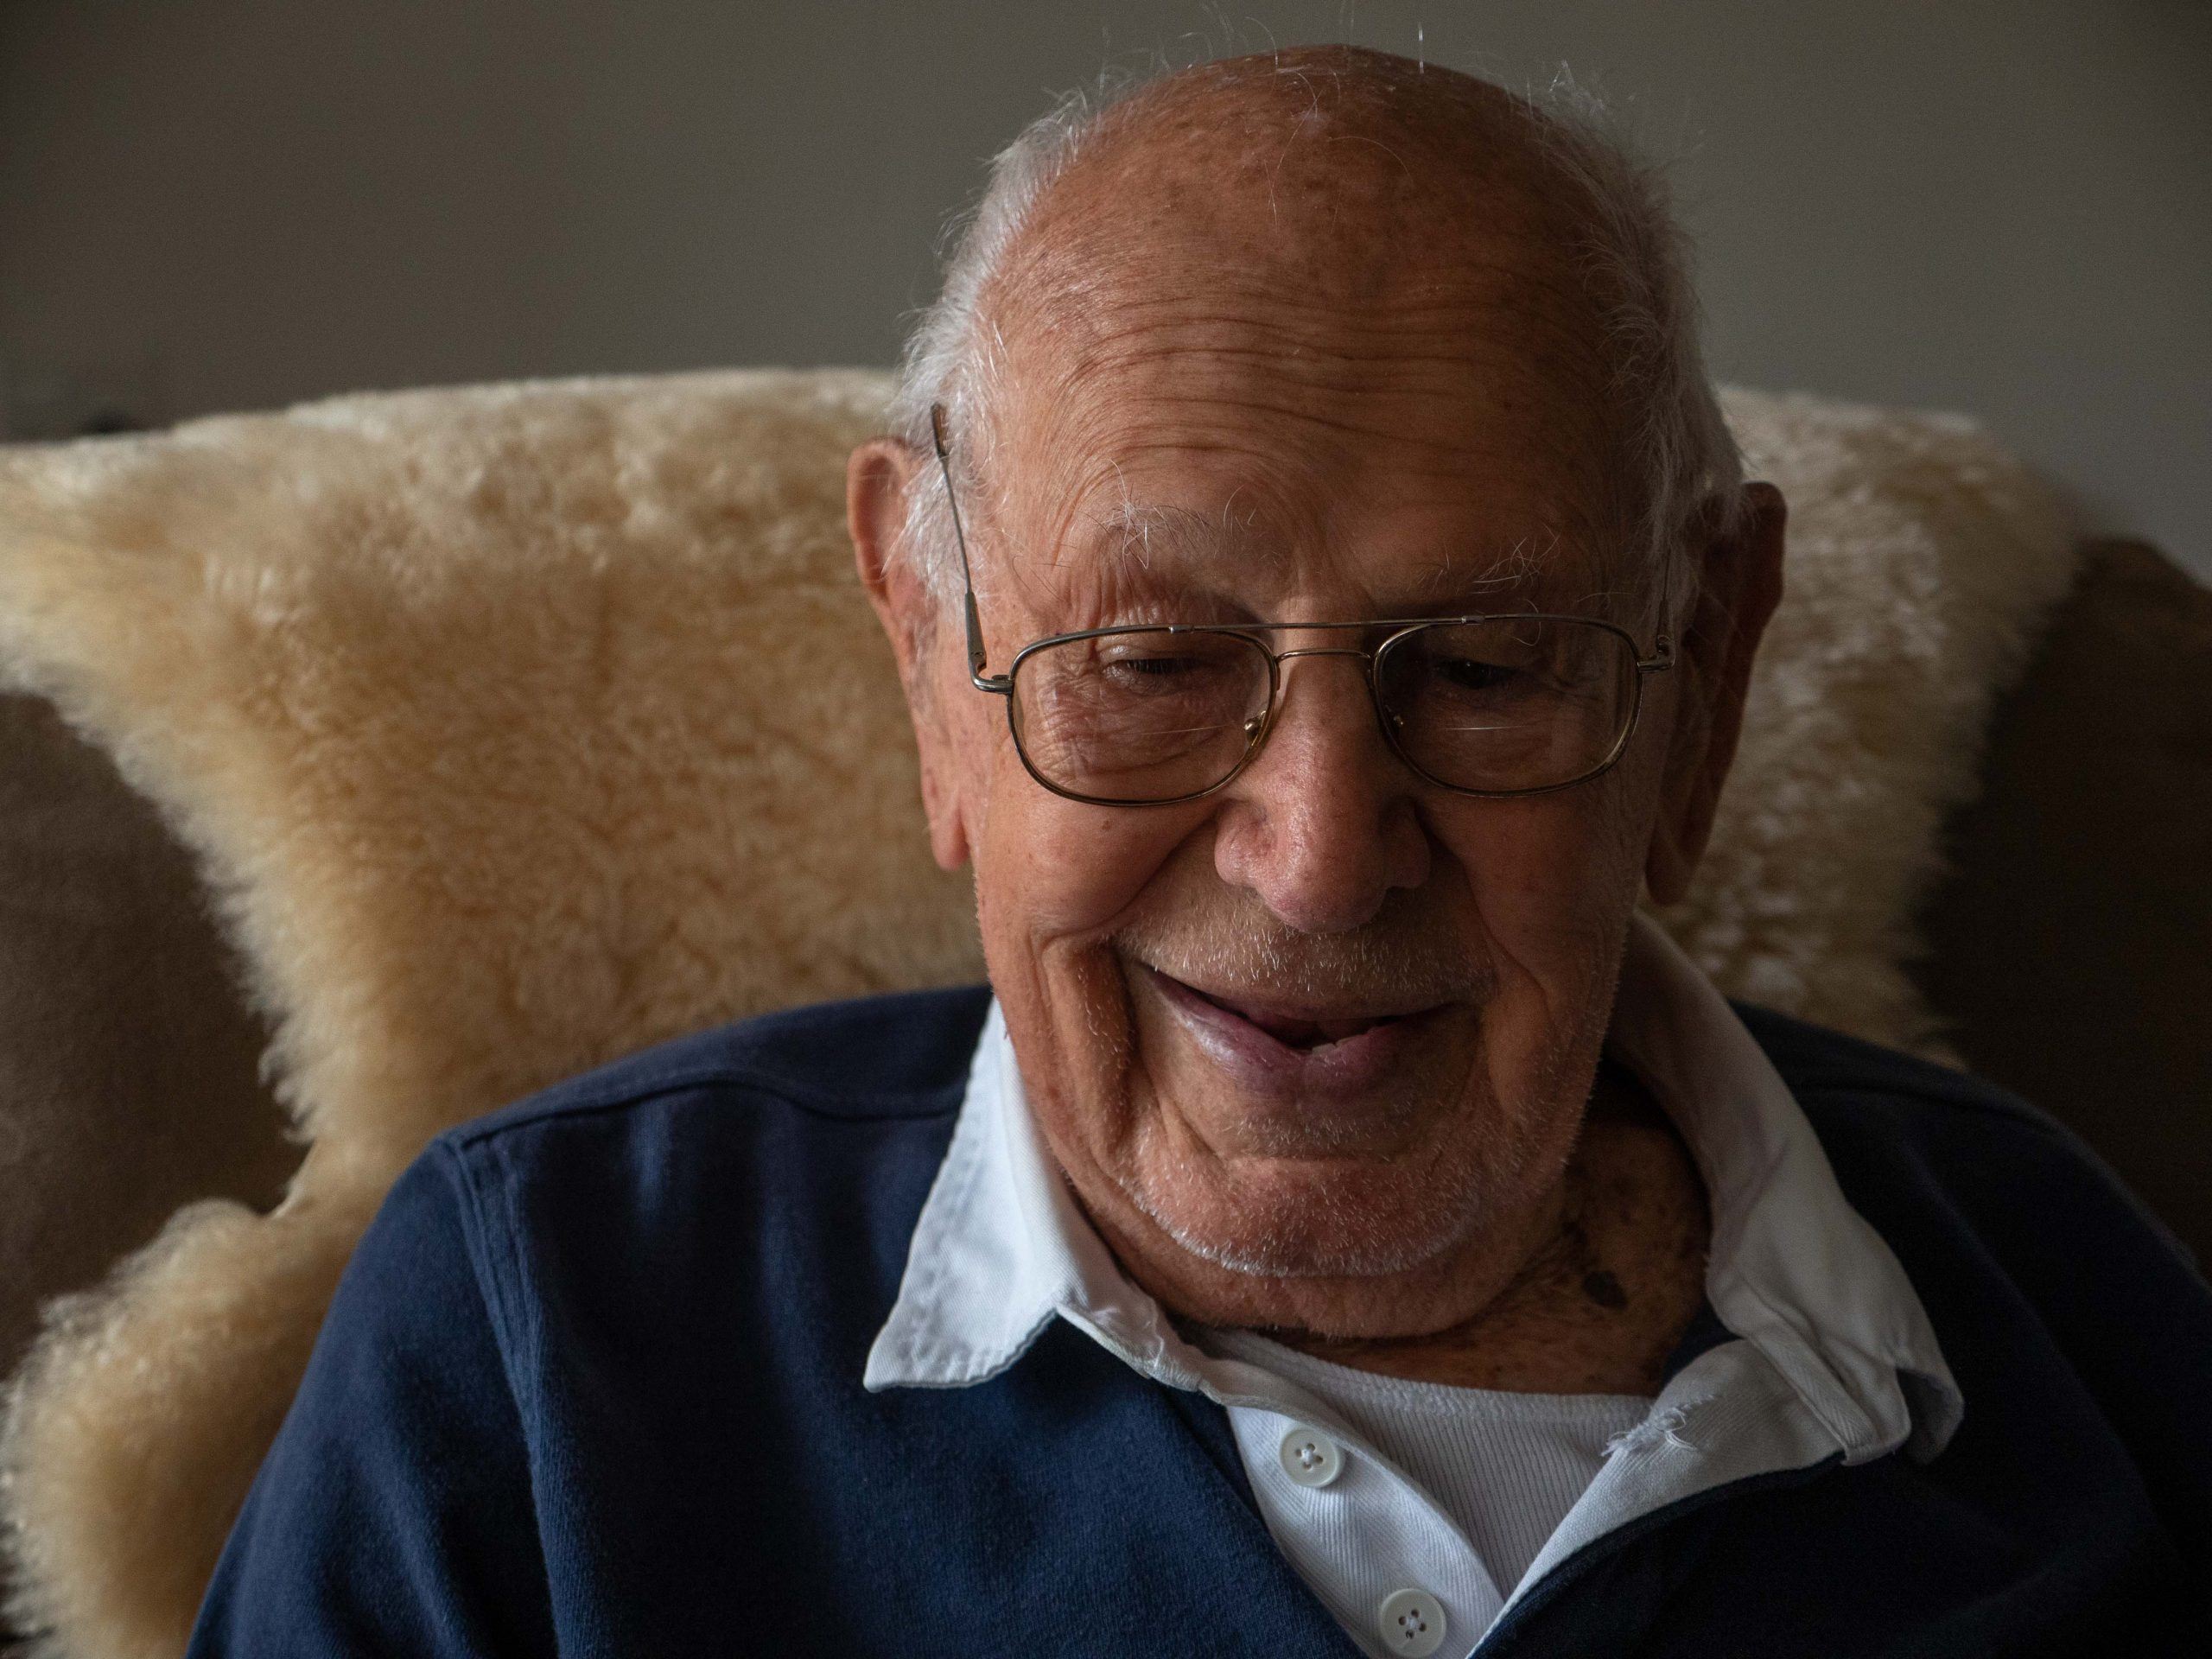 Eric 100 years old. Taken by The 100 Project